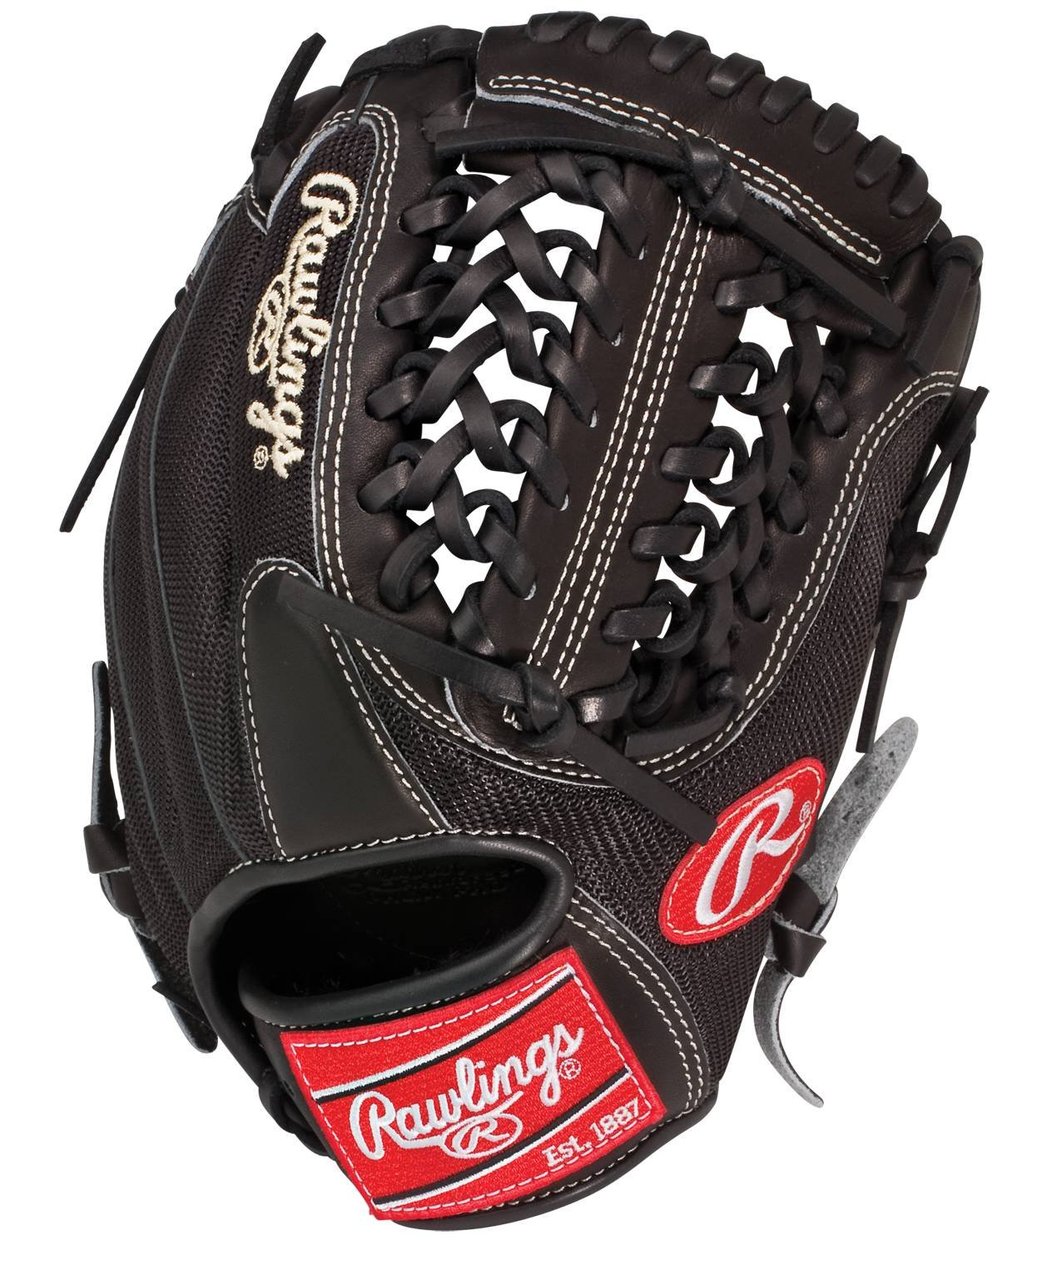 rawlings-pro204dm-heart-of-the-hide-pro-mesh-11-5-inch-baseball-glove-right-handed-throw PRO204DM-Right Handed Throw Rawlings 083321380334 Rawlings PRO204DM Heart of the Hide Pro Mesh 11.5 inch Baseball